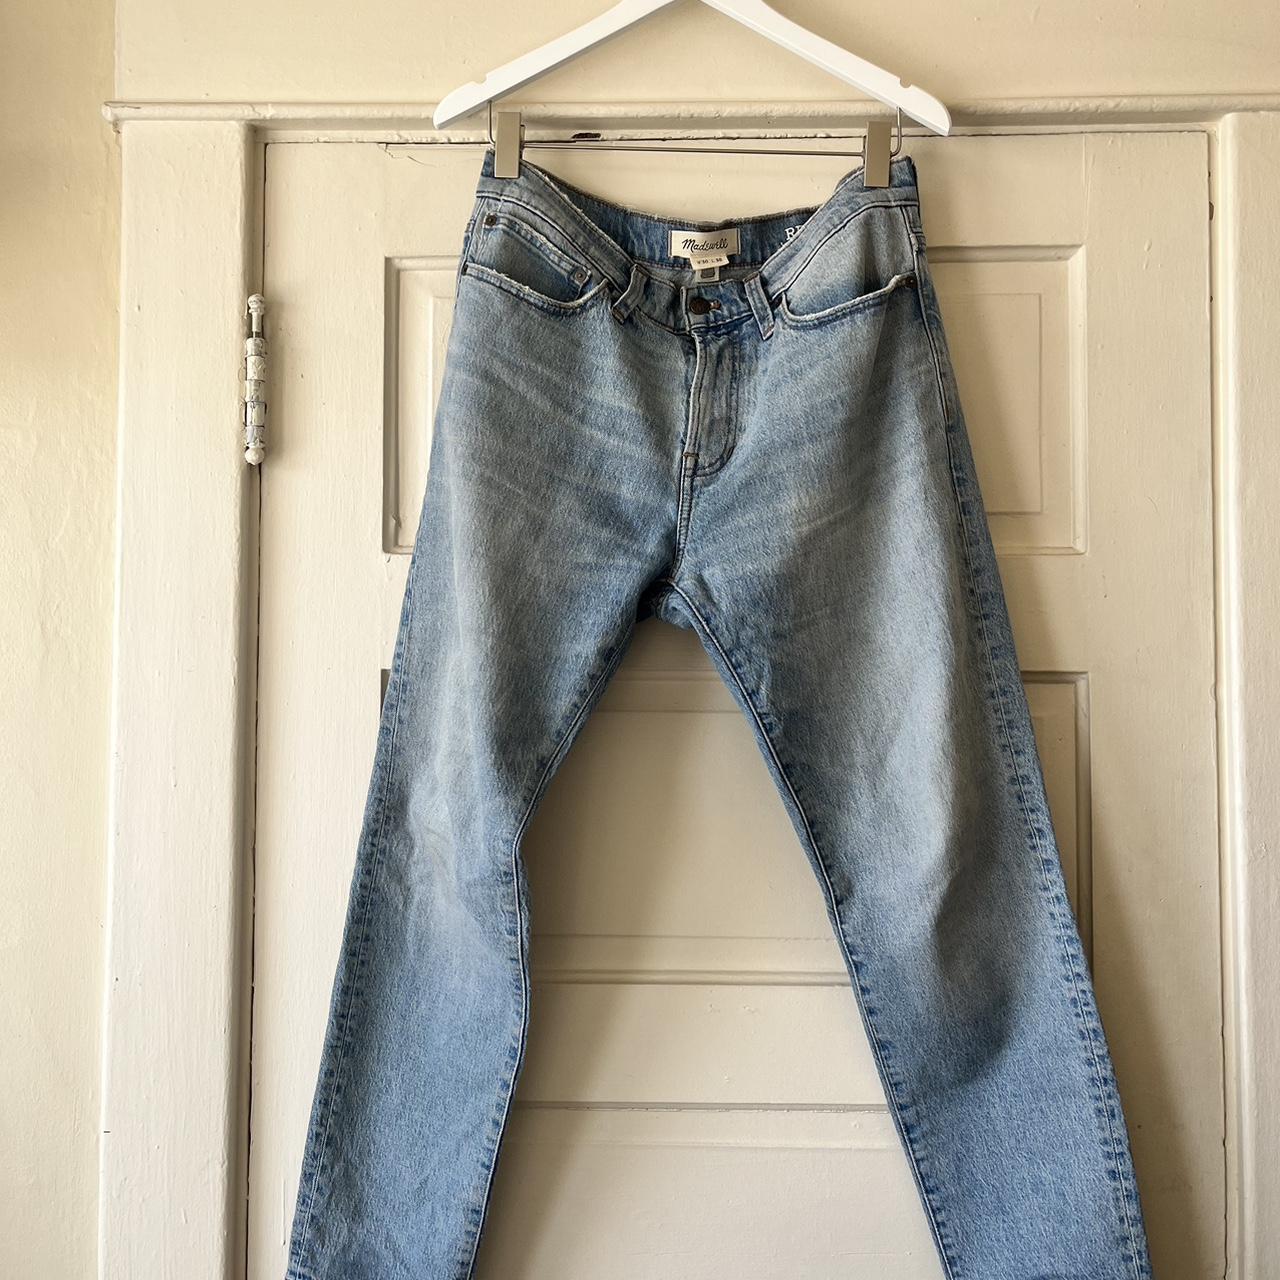 Madewell Relaxed Taper Jeans, size 30x30 Relaxed... - Depop